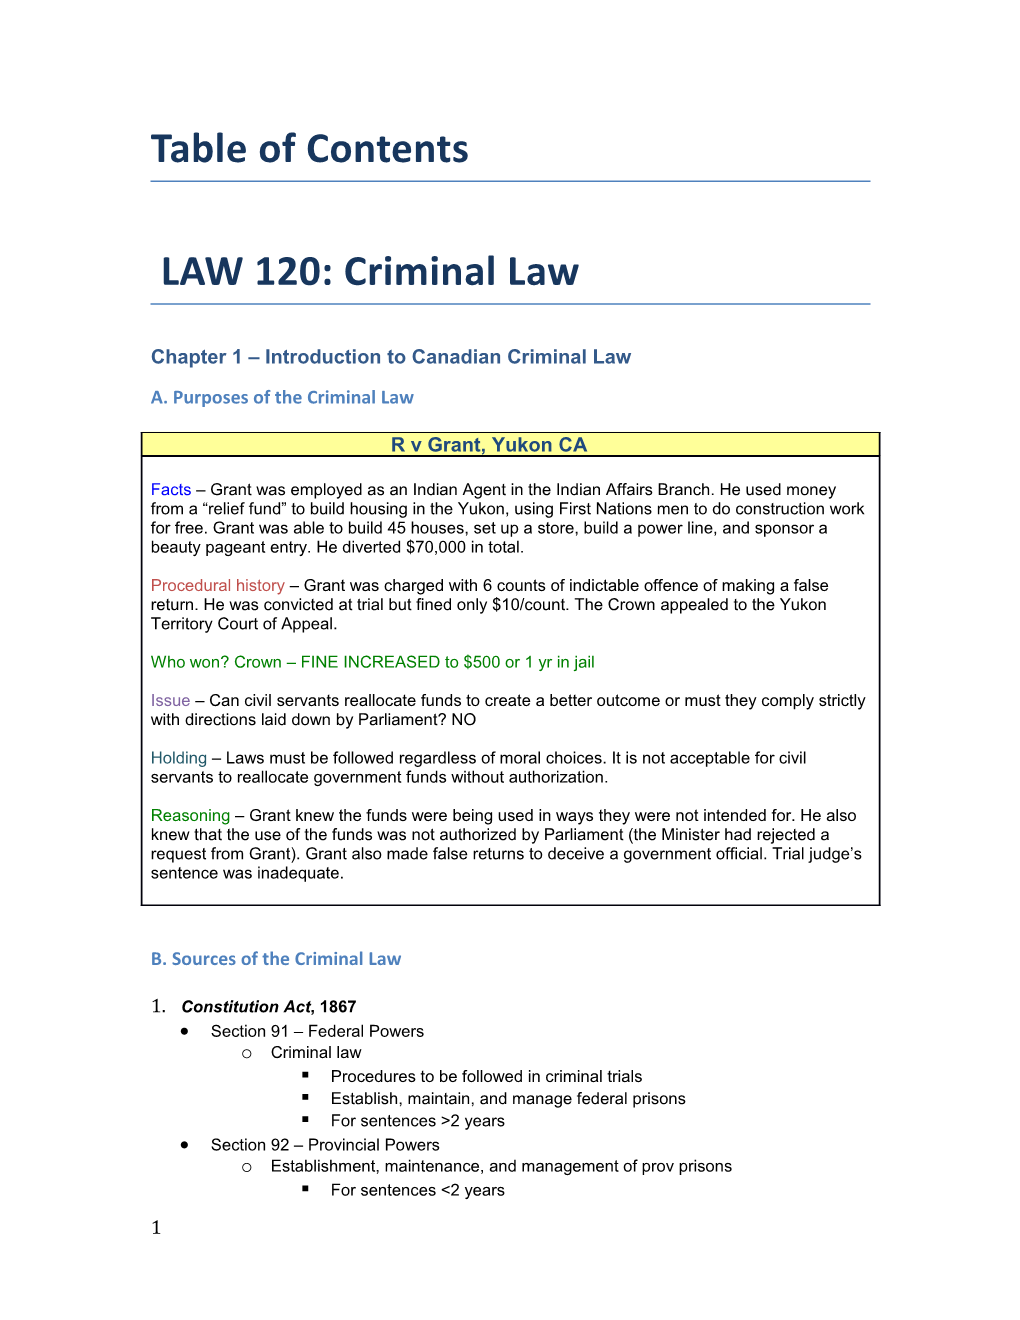 Chapter 1 Introduction to Canadian Criminal Law